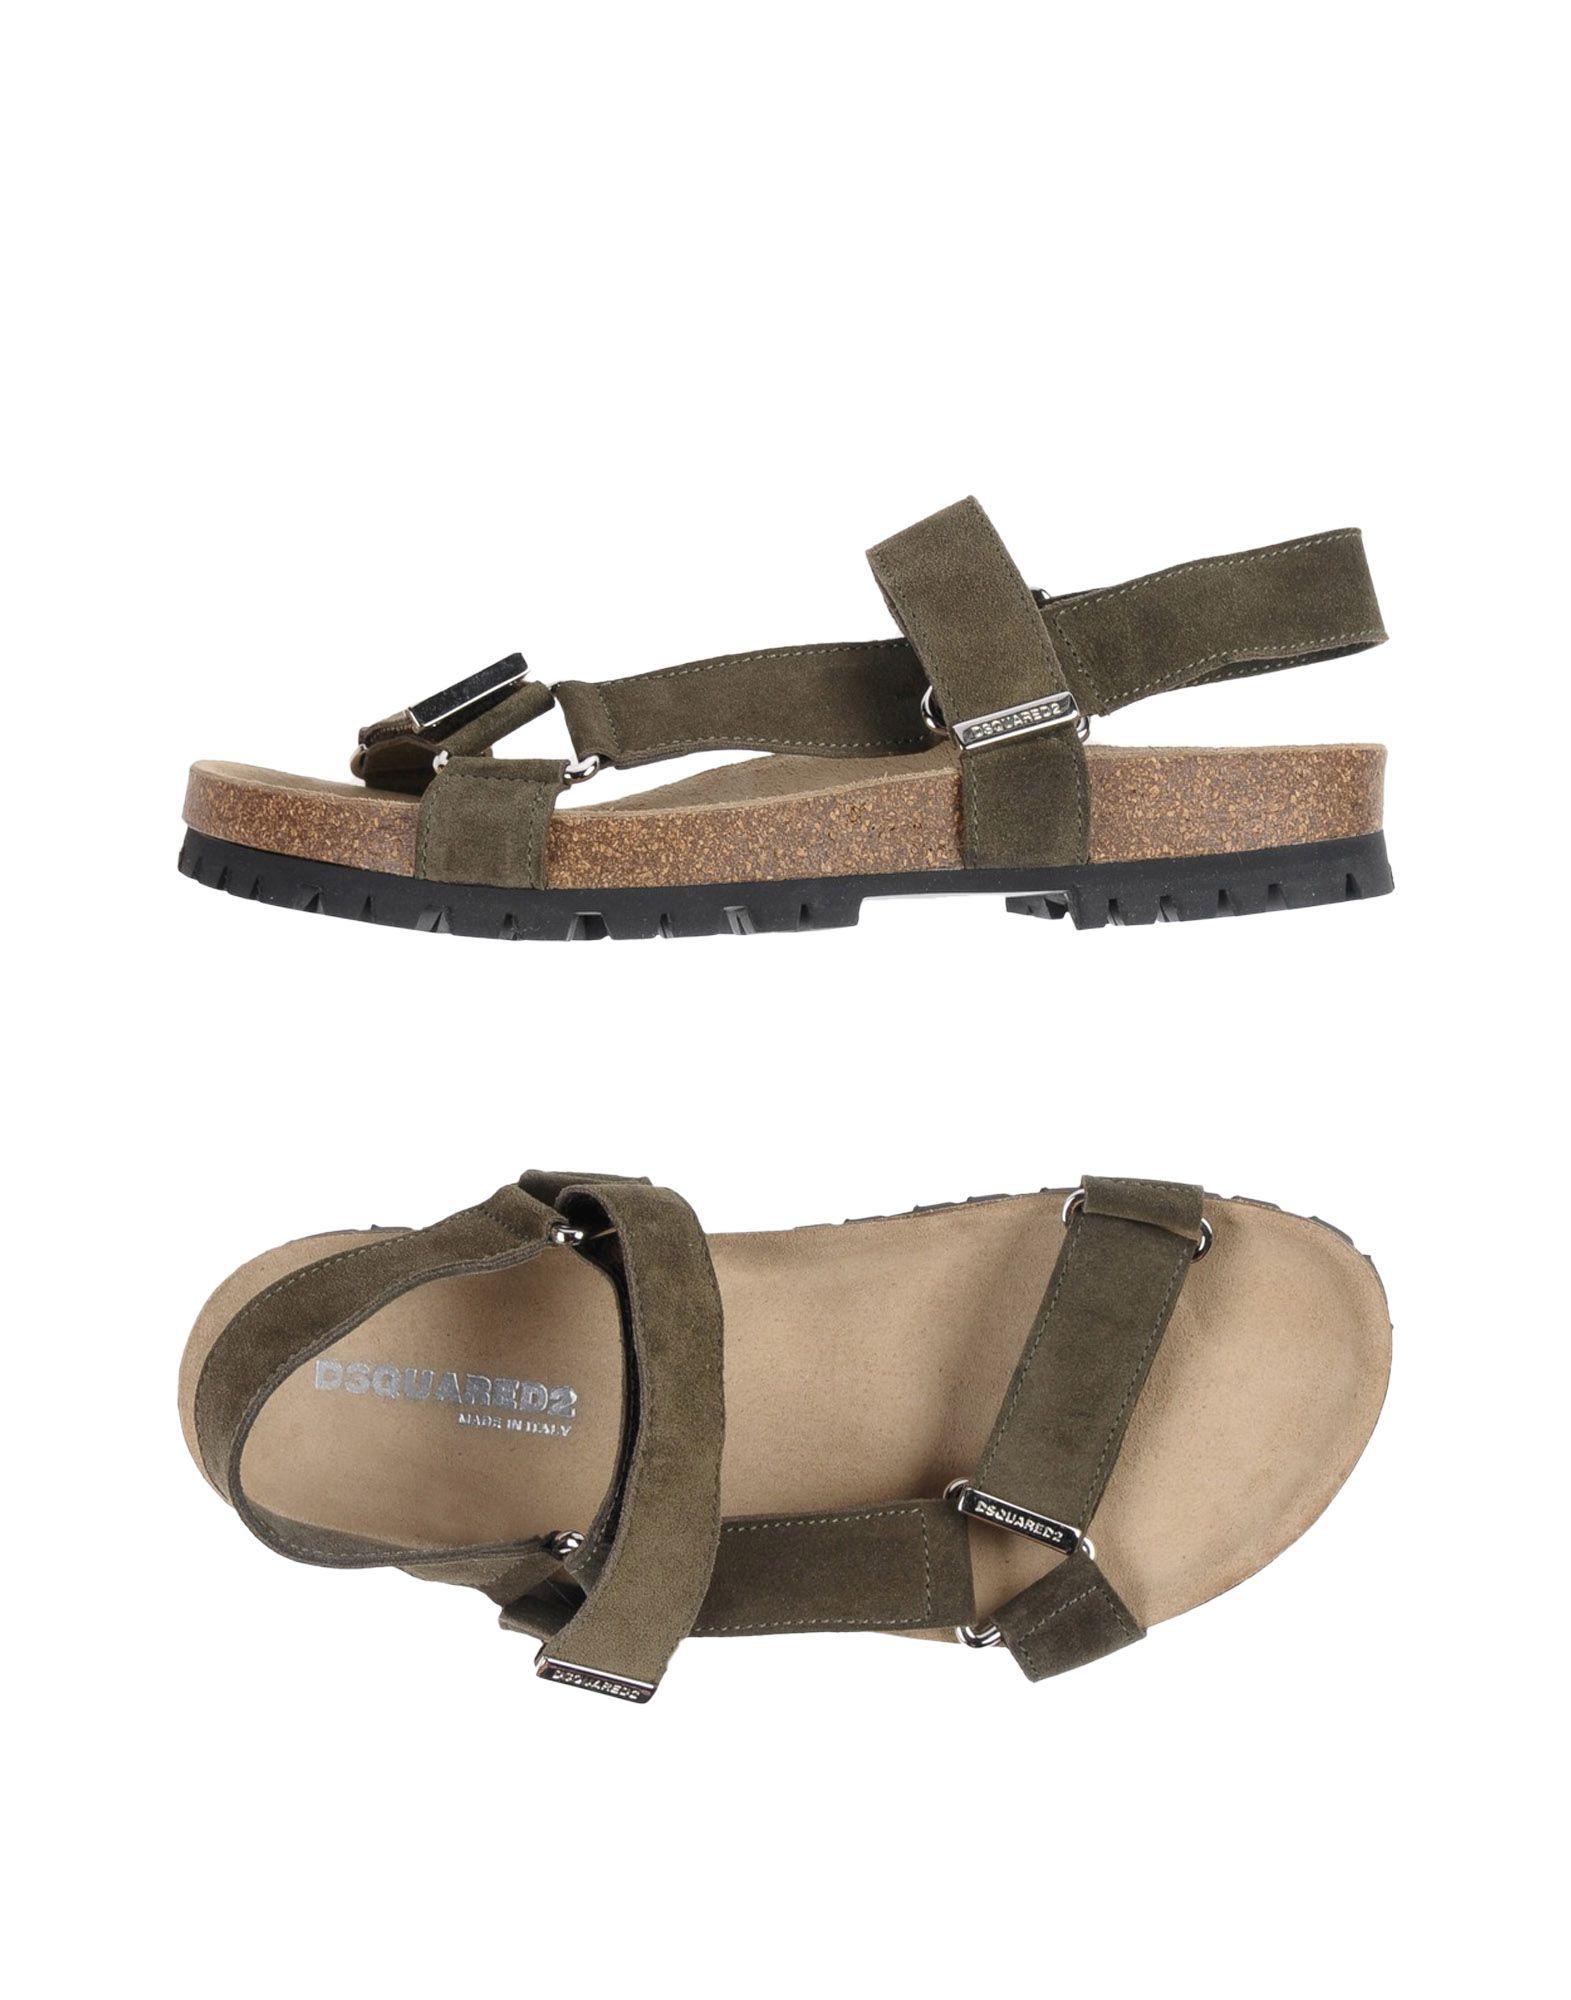 dsquared2 military sandals